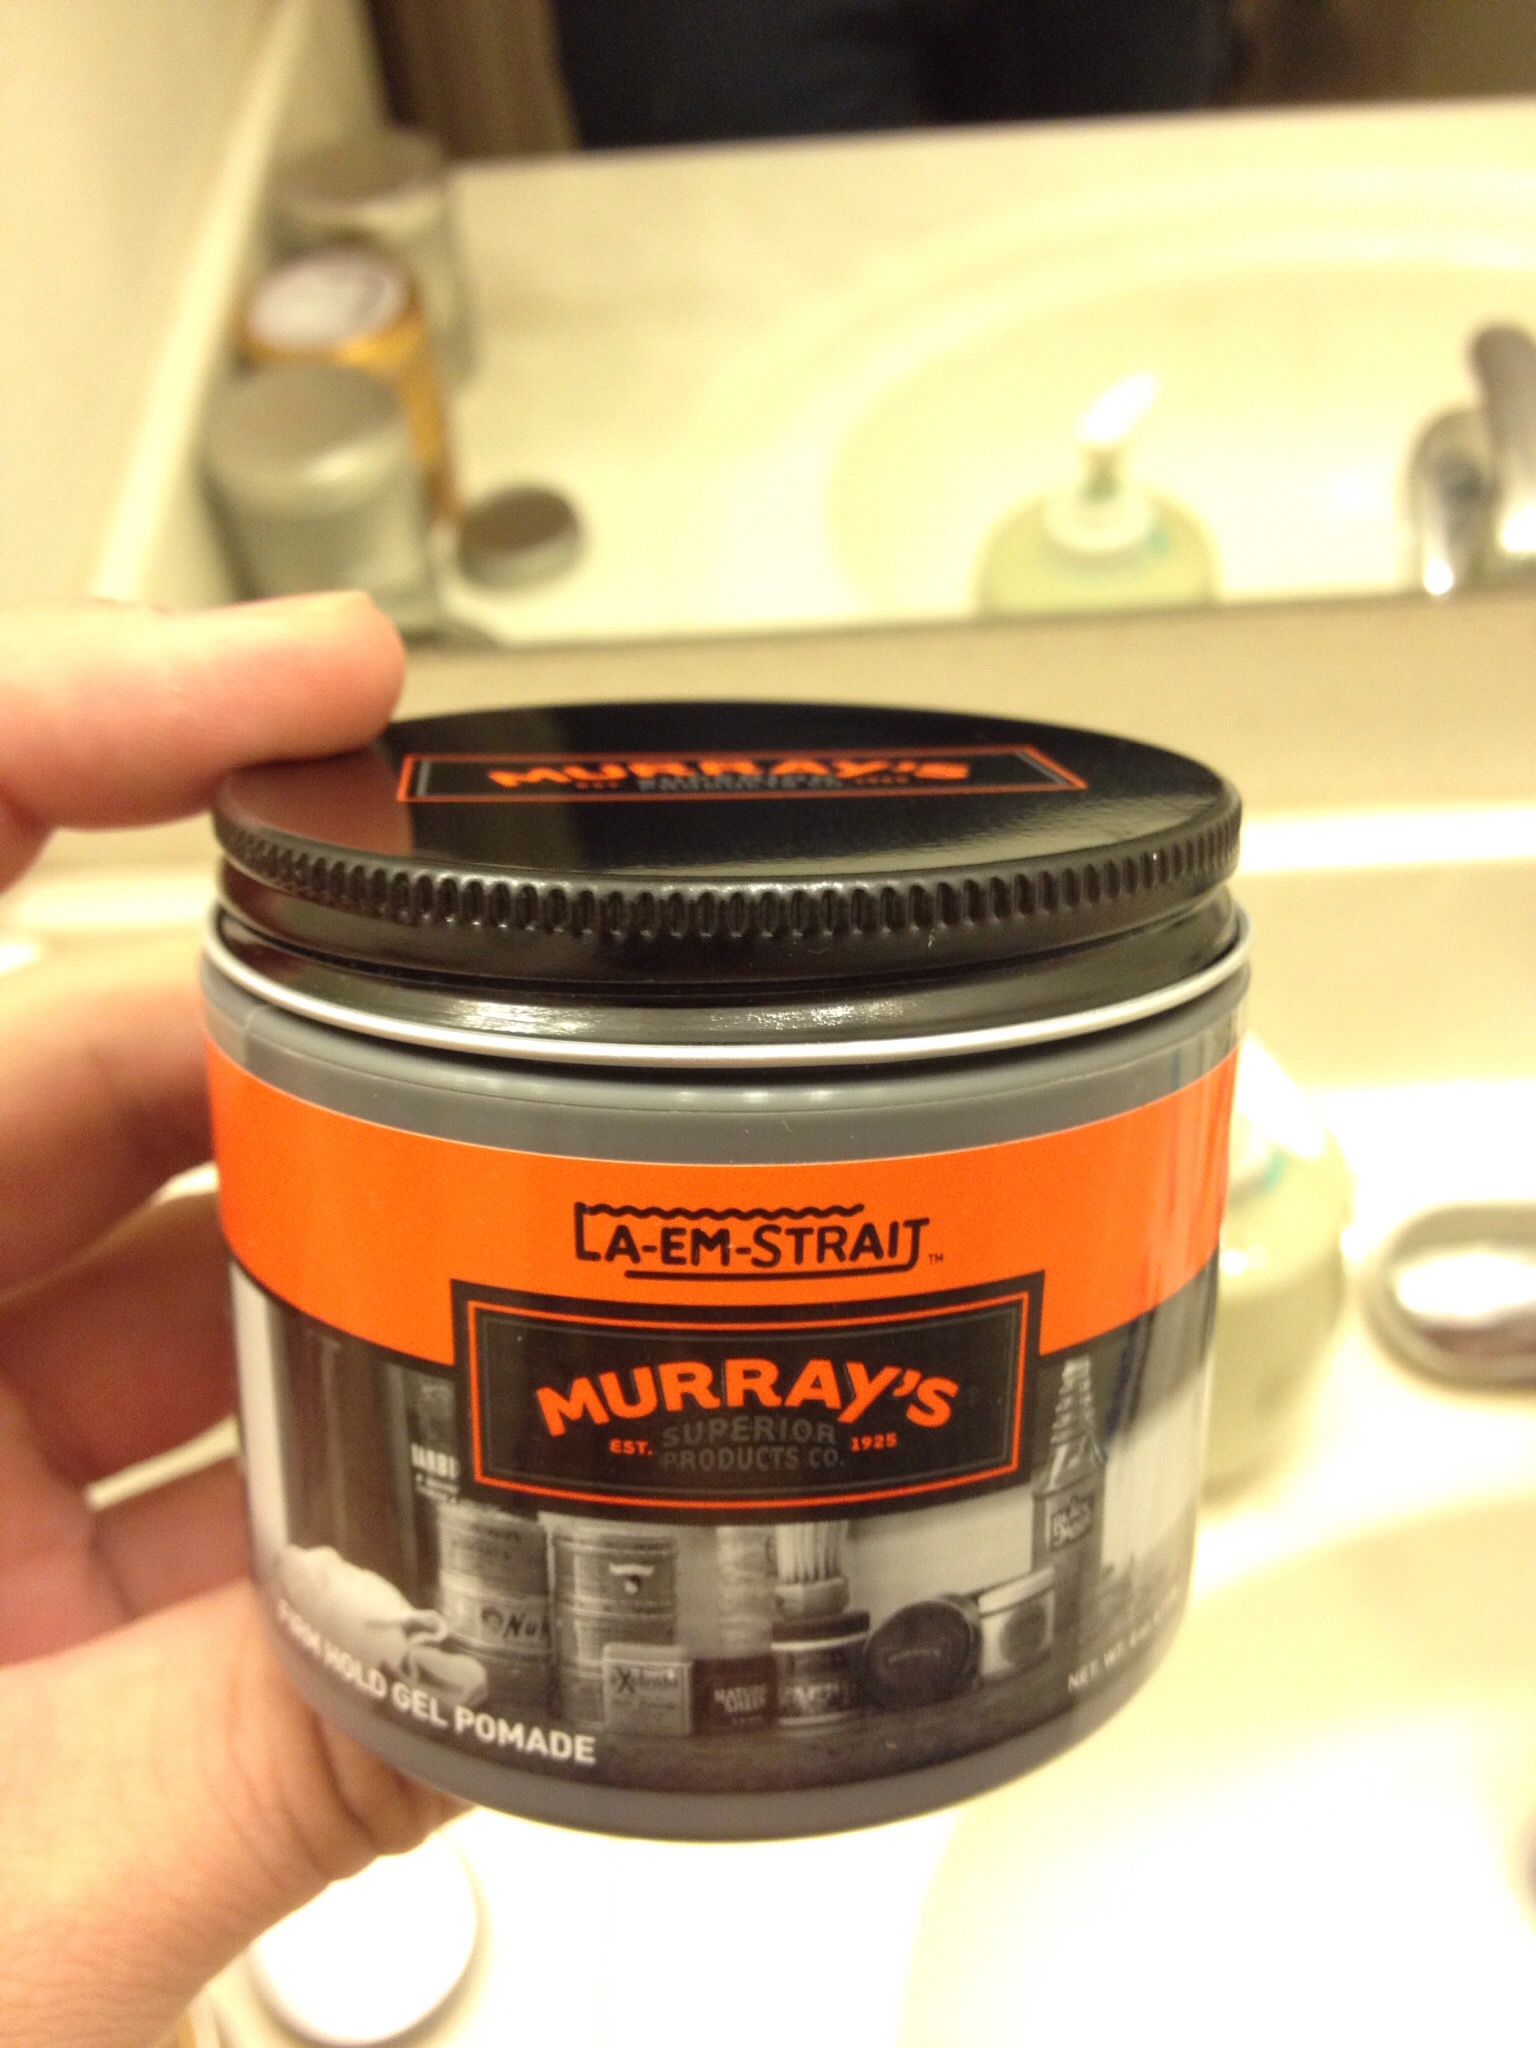 Murray's pomade is BAD for you. STOP USING IT NOW! — Steemit